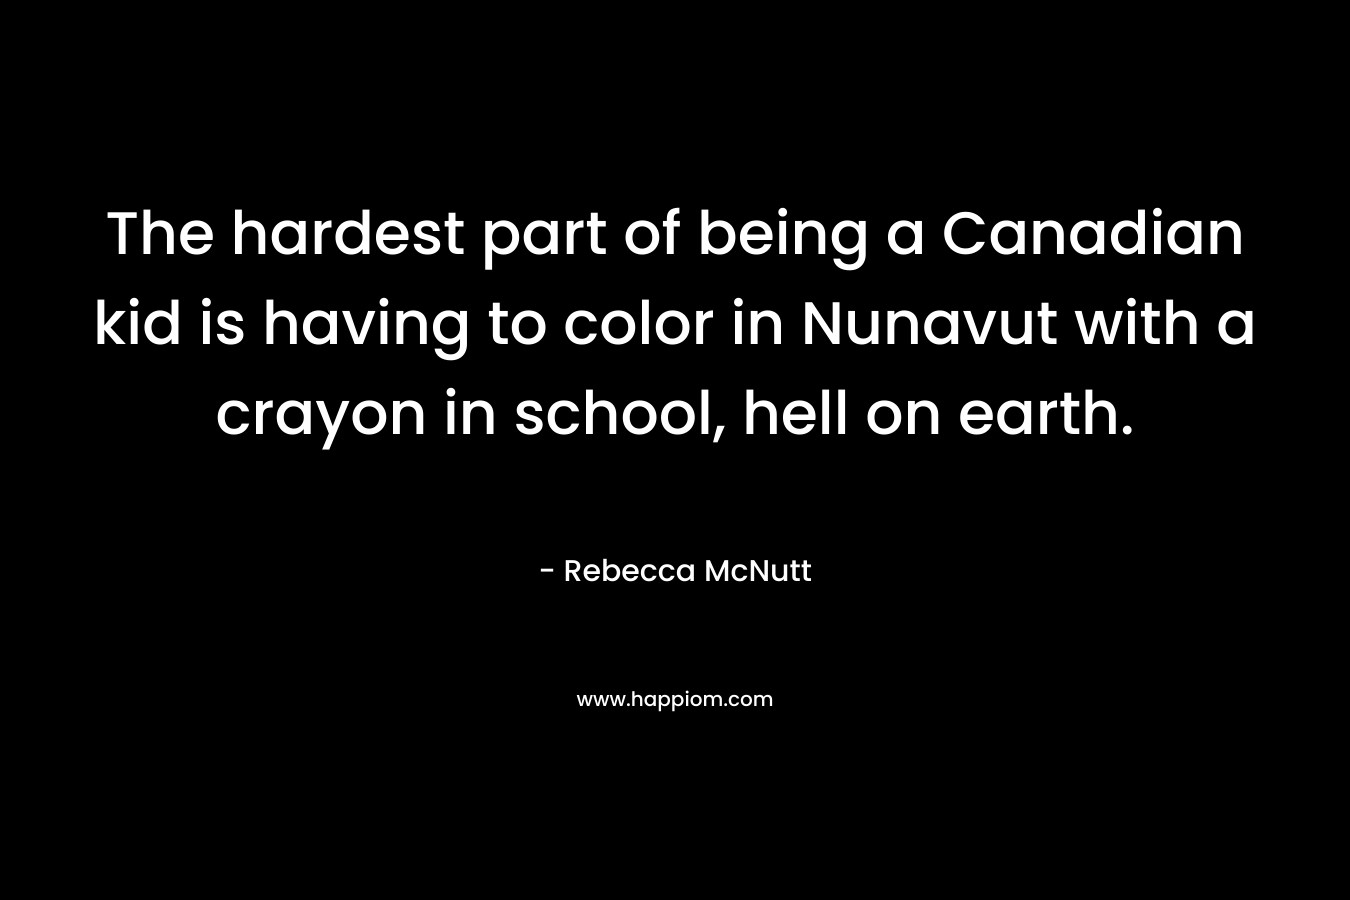 The hardest part of being a Canadian kid is having to color in Nunavut with a crayon in school, hell on earth.